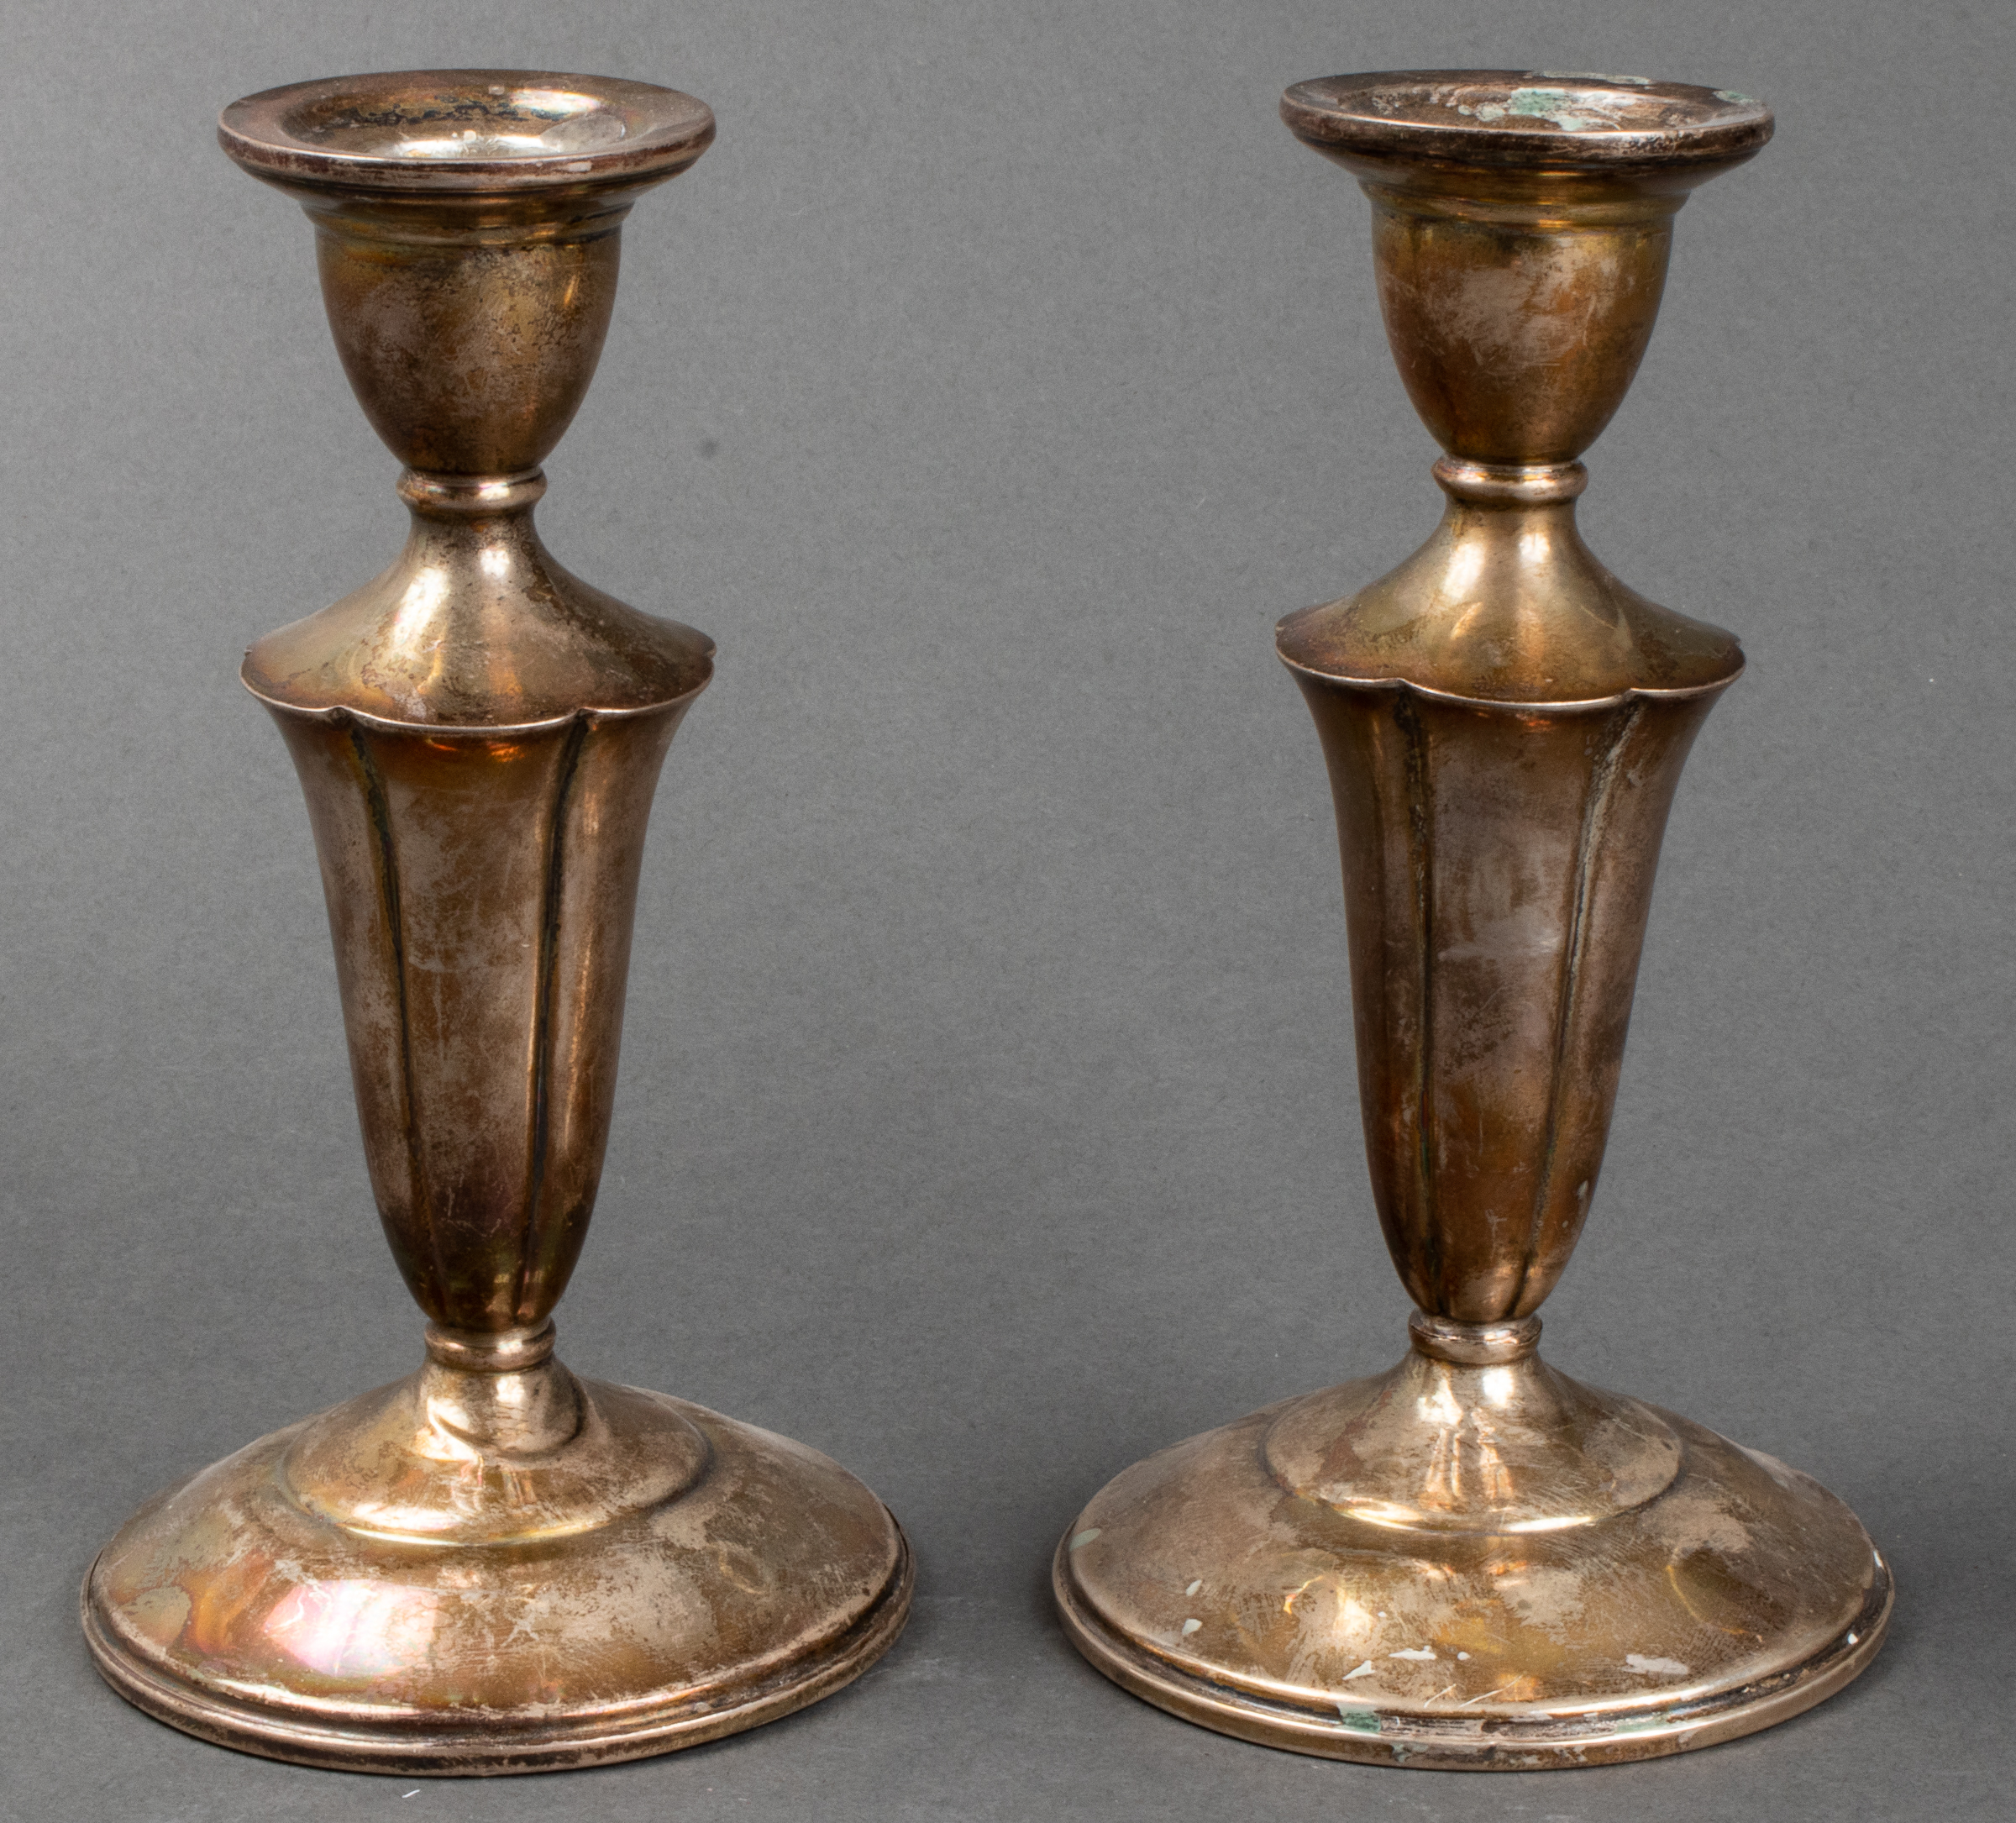 STERLING SILVER CANDLESTICKS, PAIR